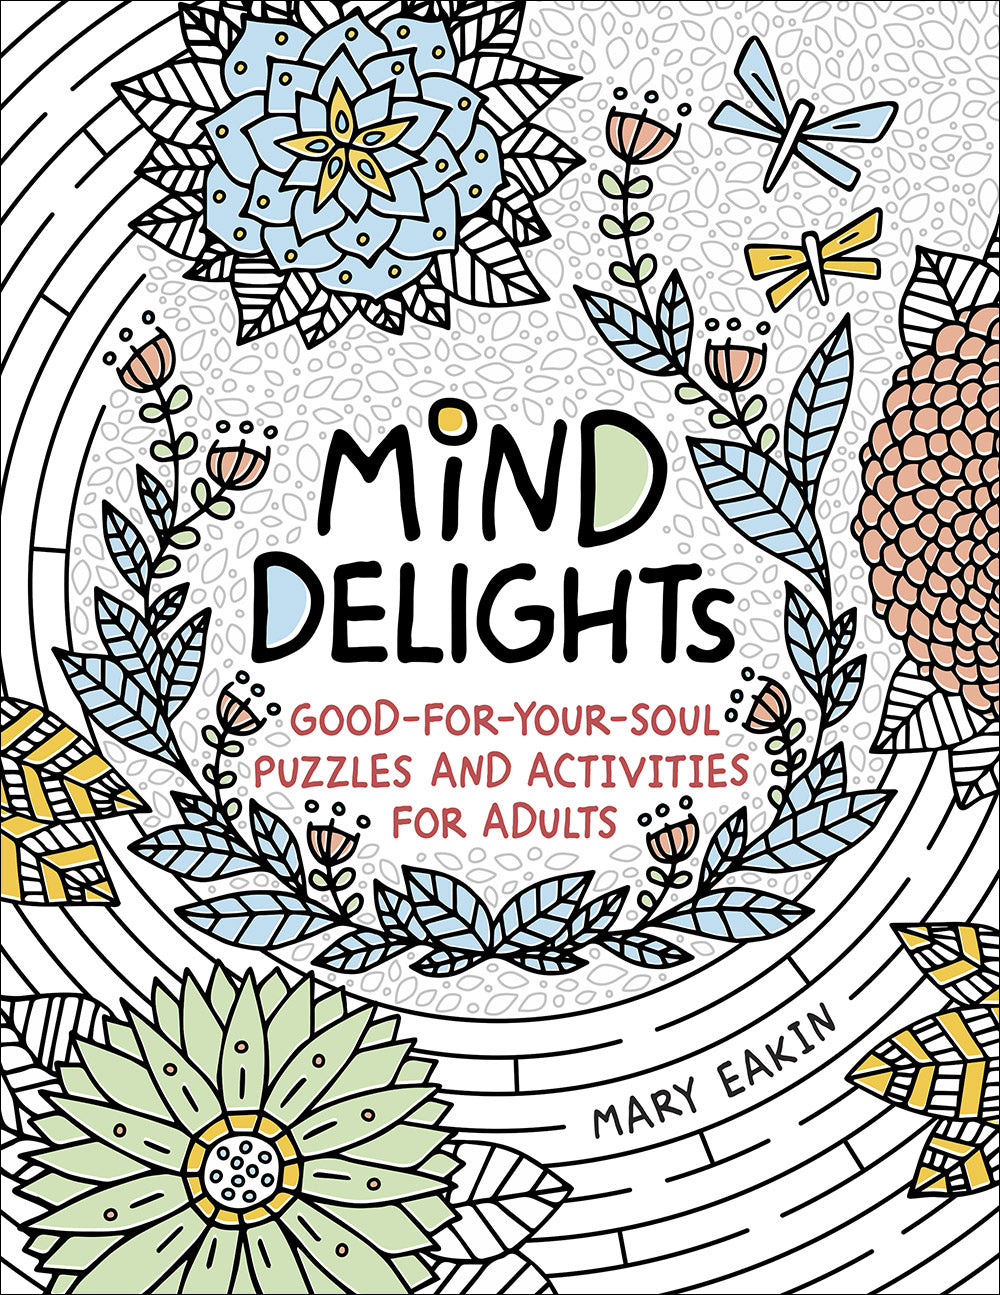 Image of Mind Delights other